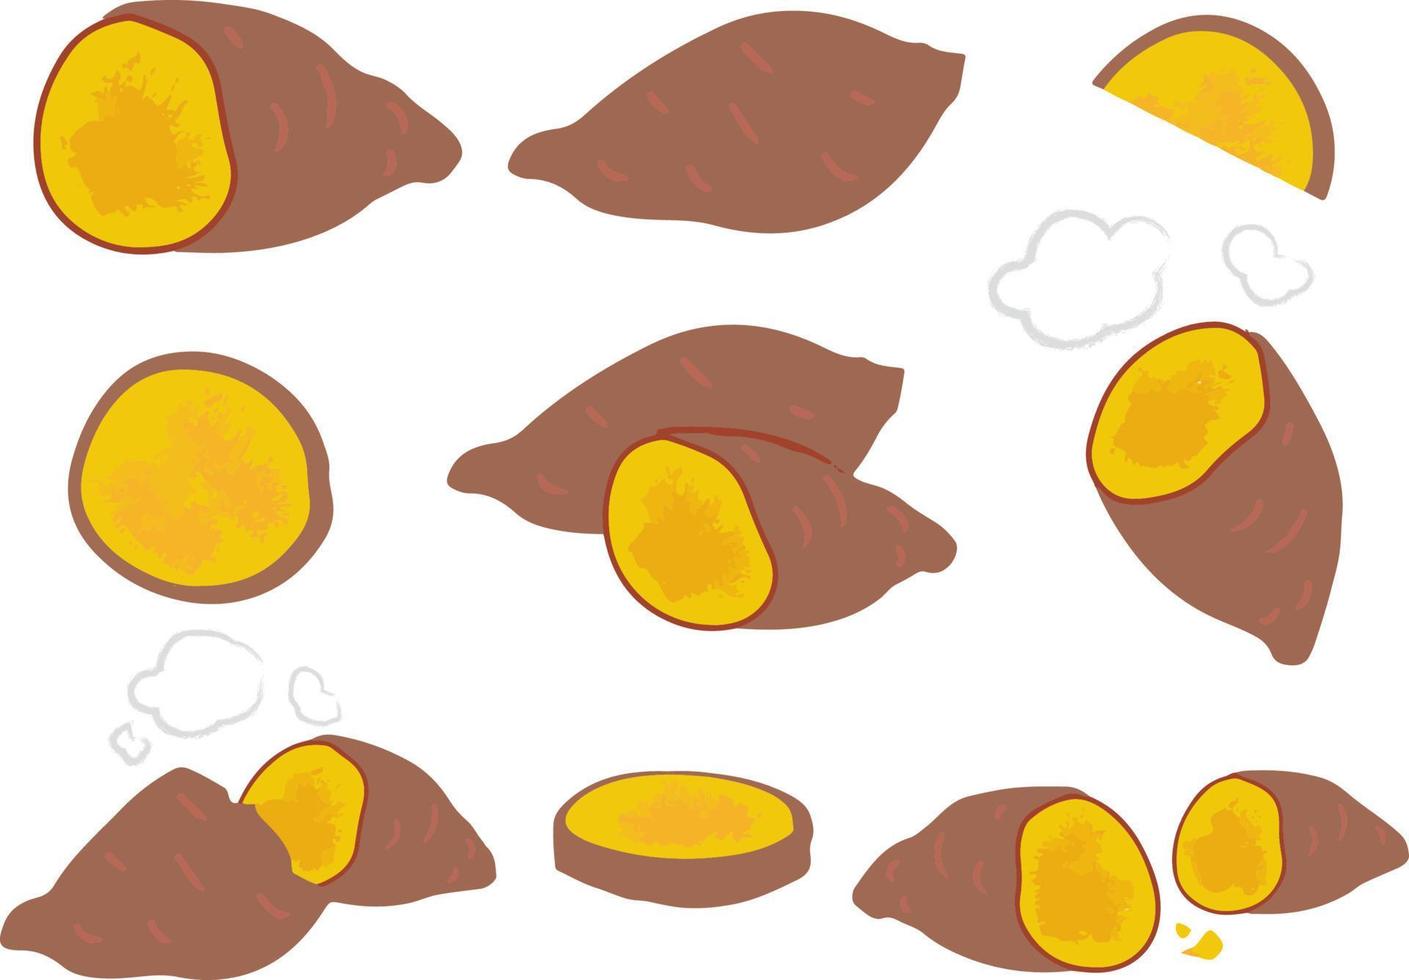 Sweet potato, brown whole tuber and sliced. Vector illustration cartoon flat icon isolated on pink.